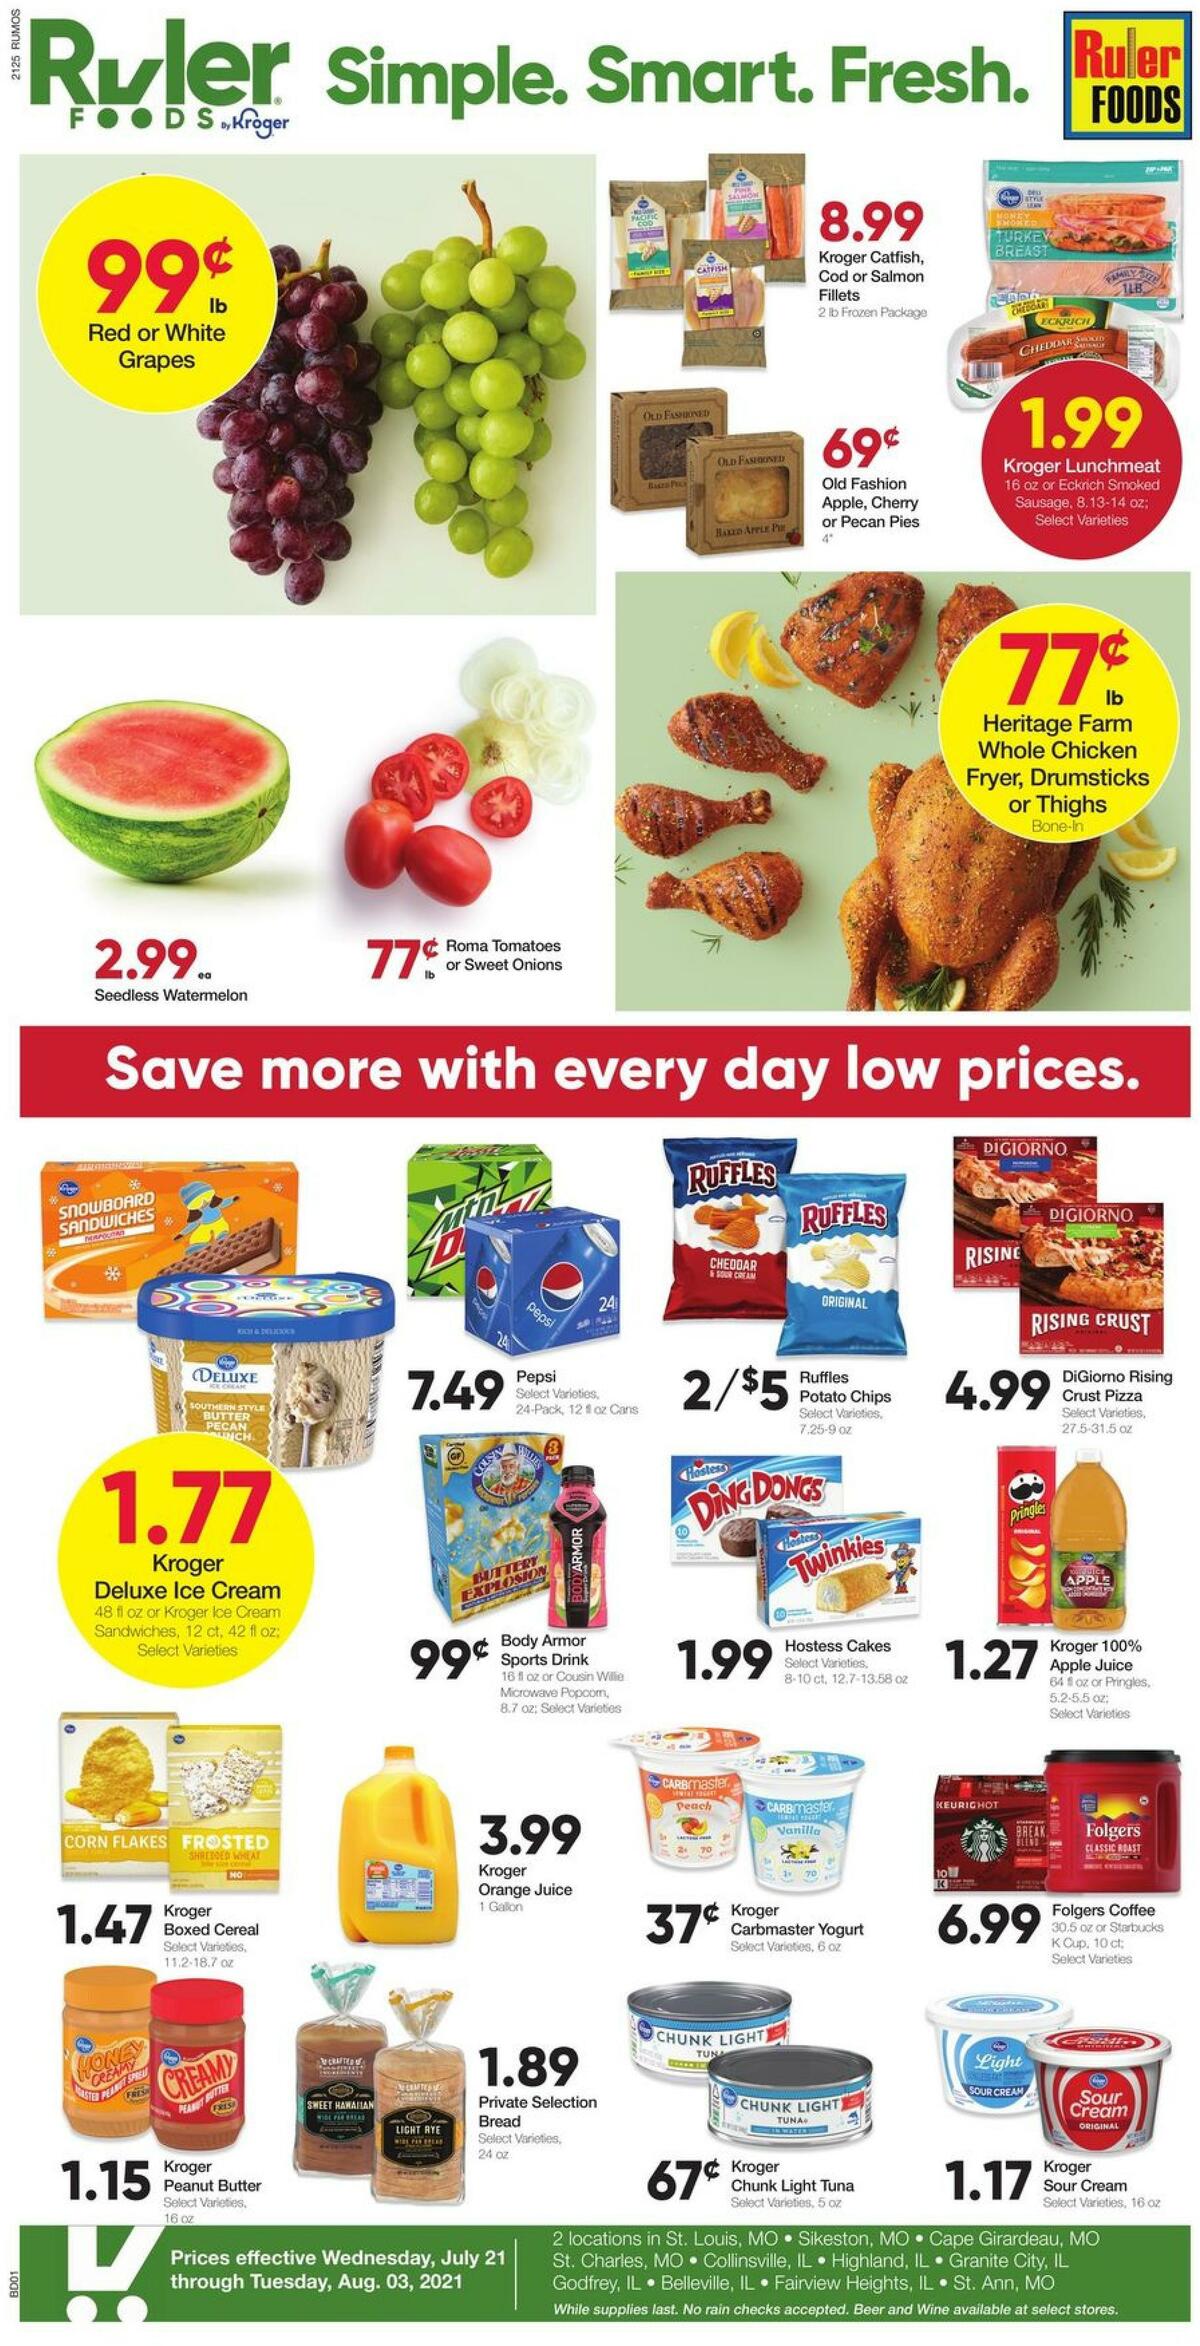 Ruler Foods Weekly Ad from July 21